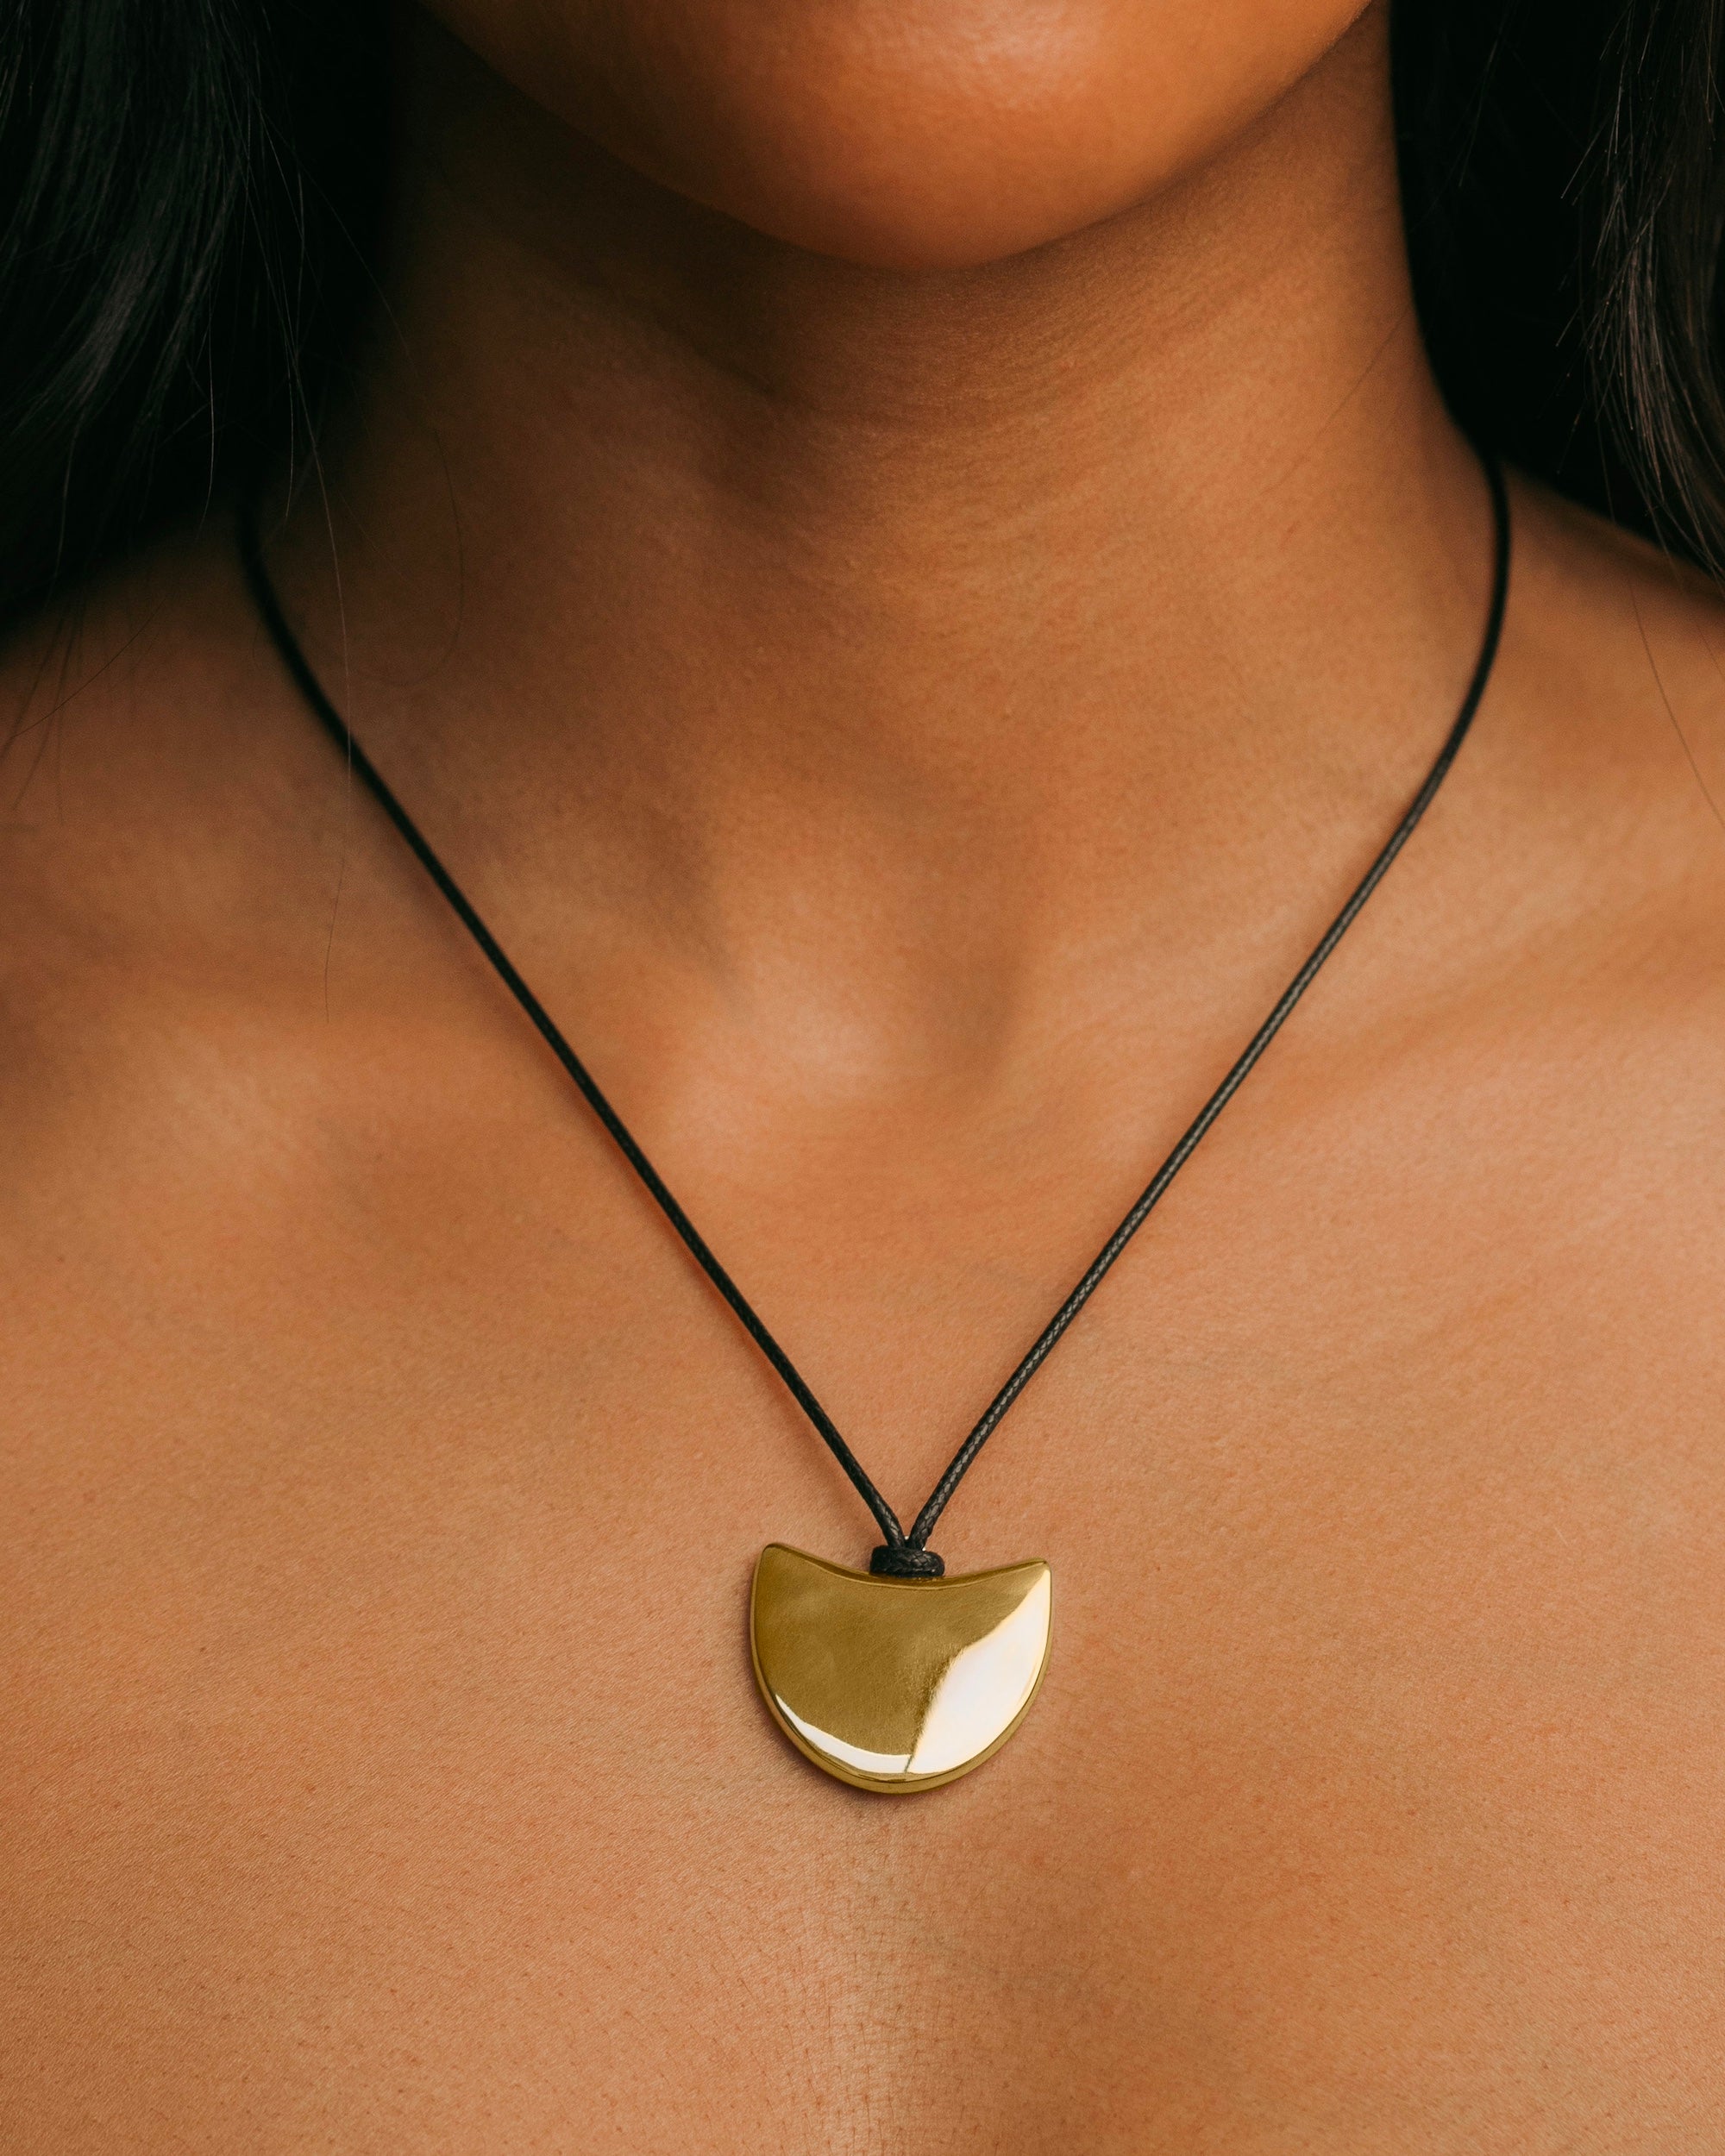 Monikh Dale x Daphine Vol. II. Singh Gold Plated Necklace.